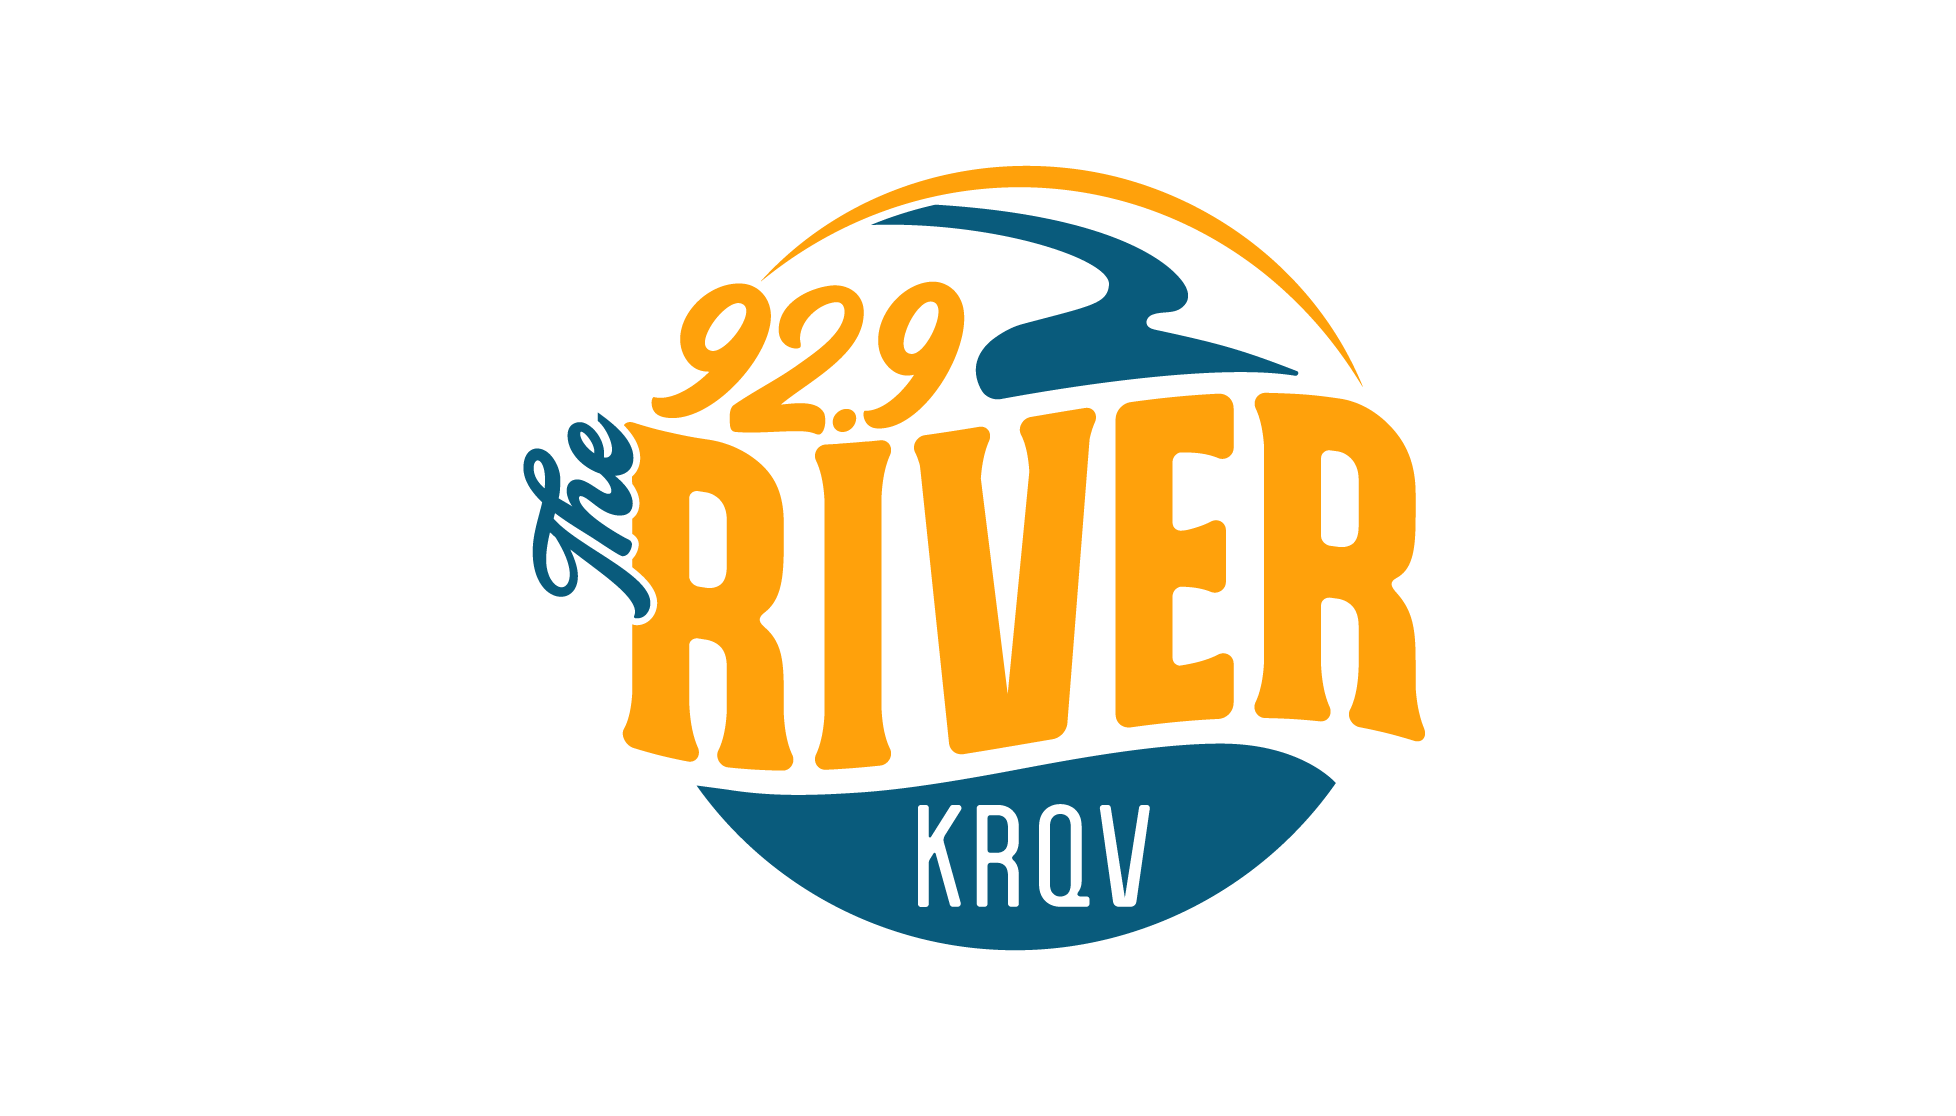 92.9 The River - Born to Win - Official Contest Rules